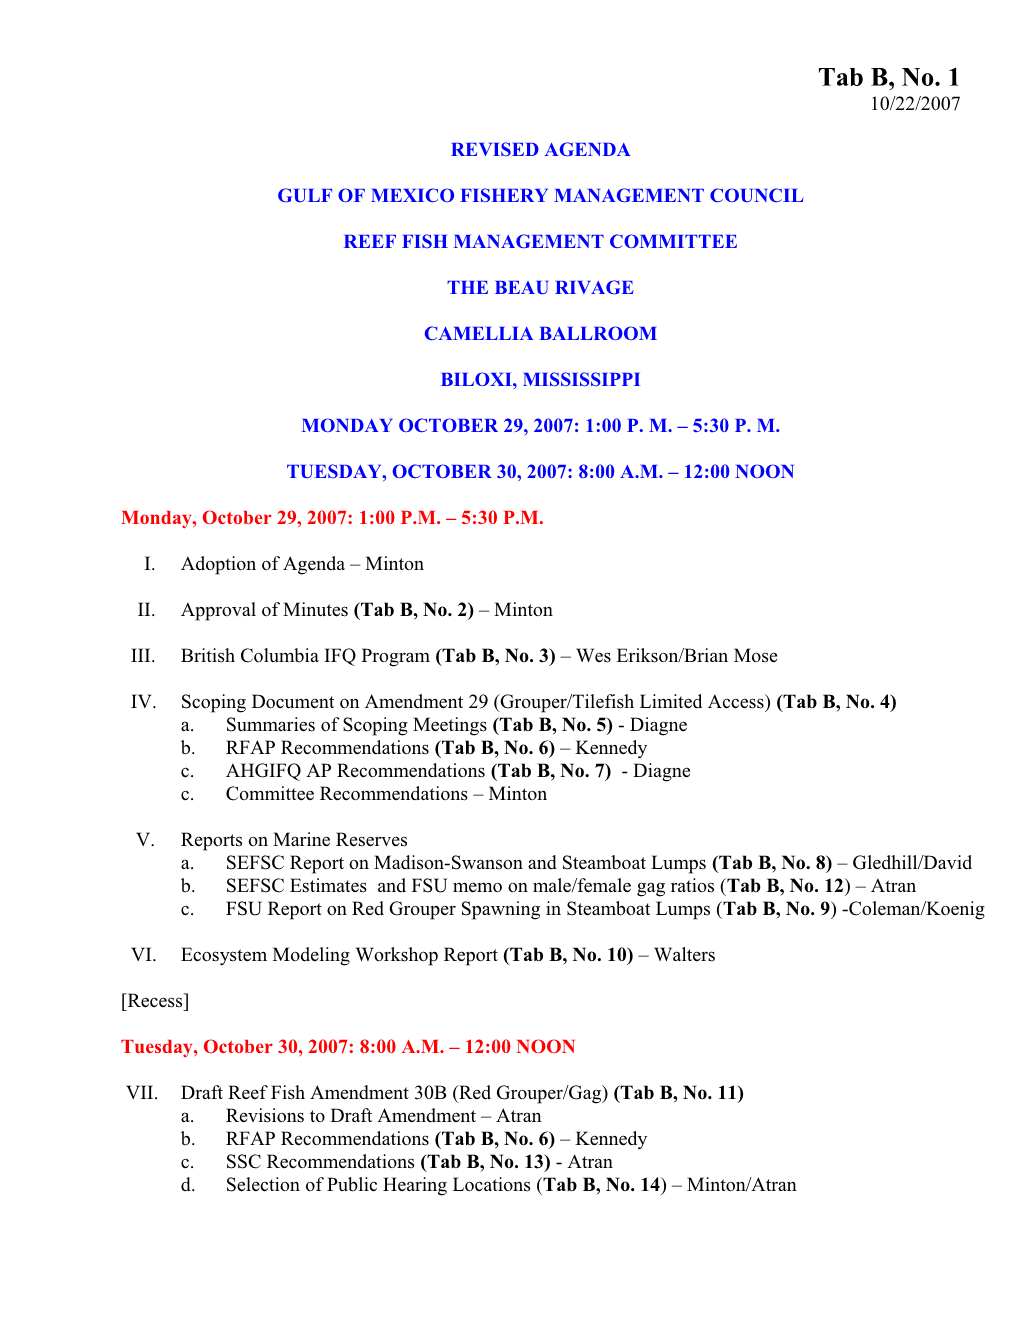 Gulf of Mexico Fishery Management Council s3